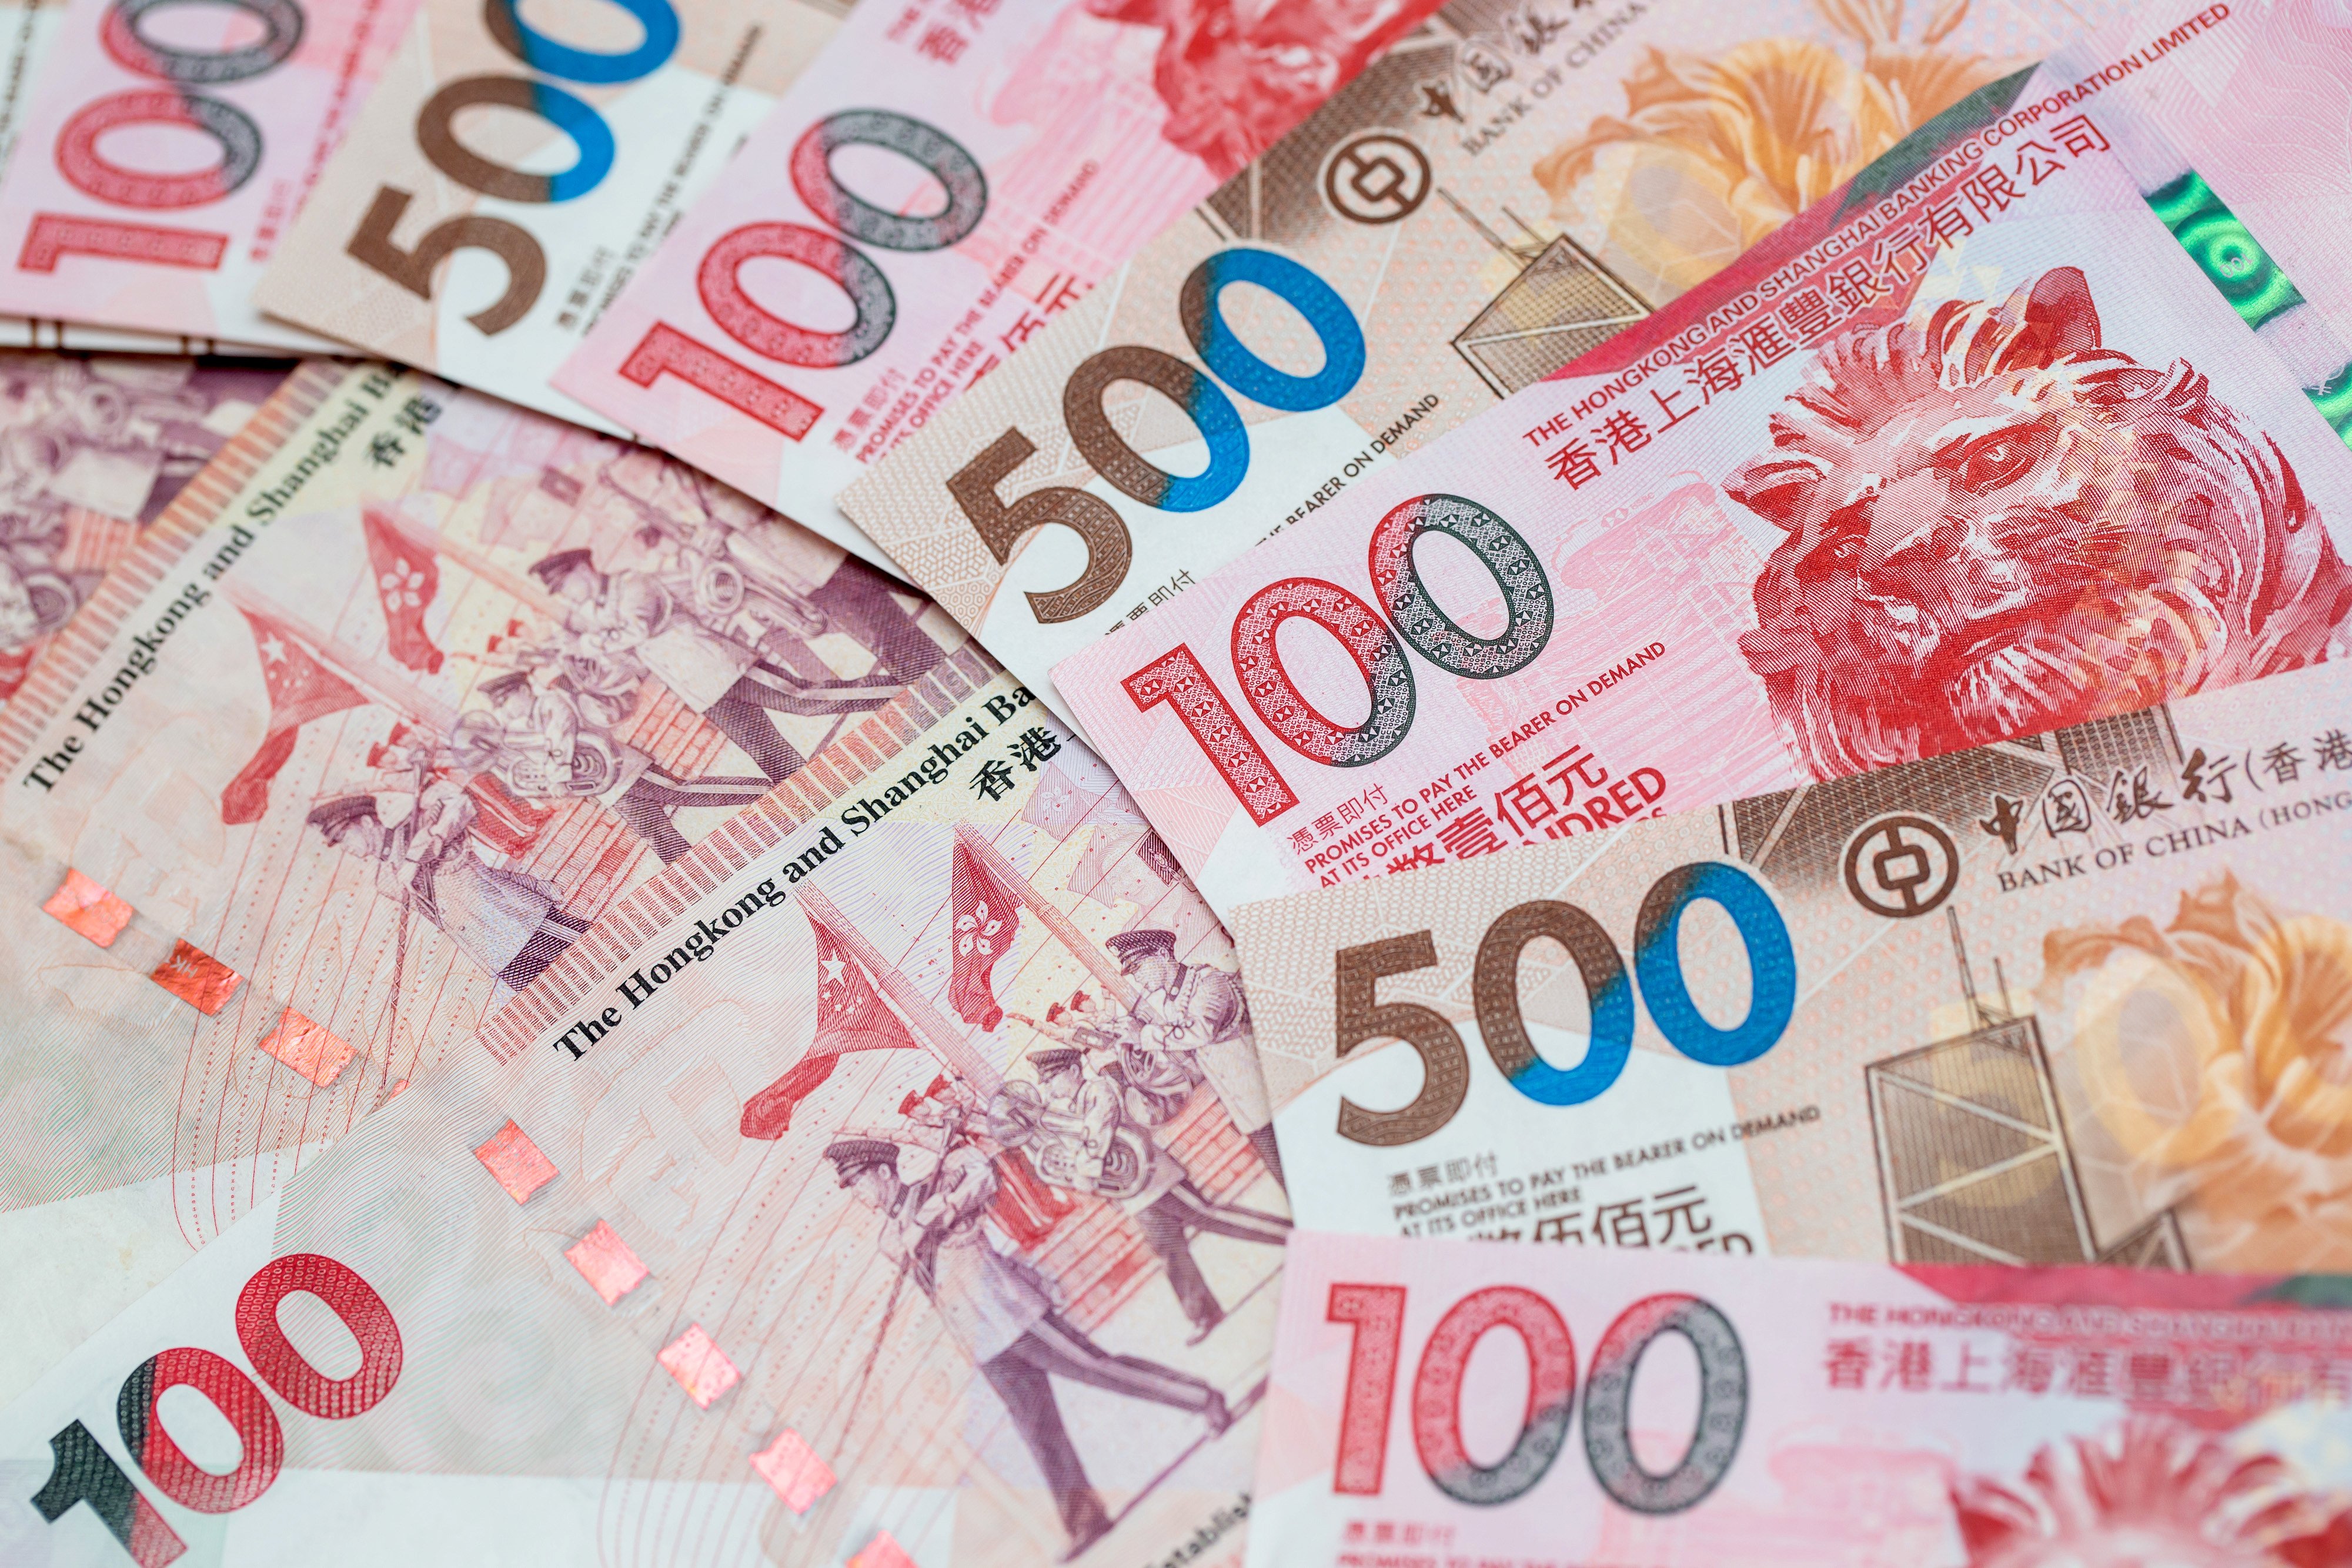 Hong Kong’s de facto central bank says it has set up a working group to study the feasibility of an e-Hong Kong dollar. Photo: Bloomberg